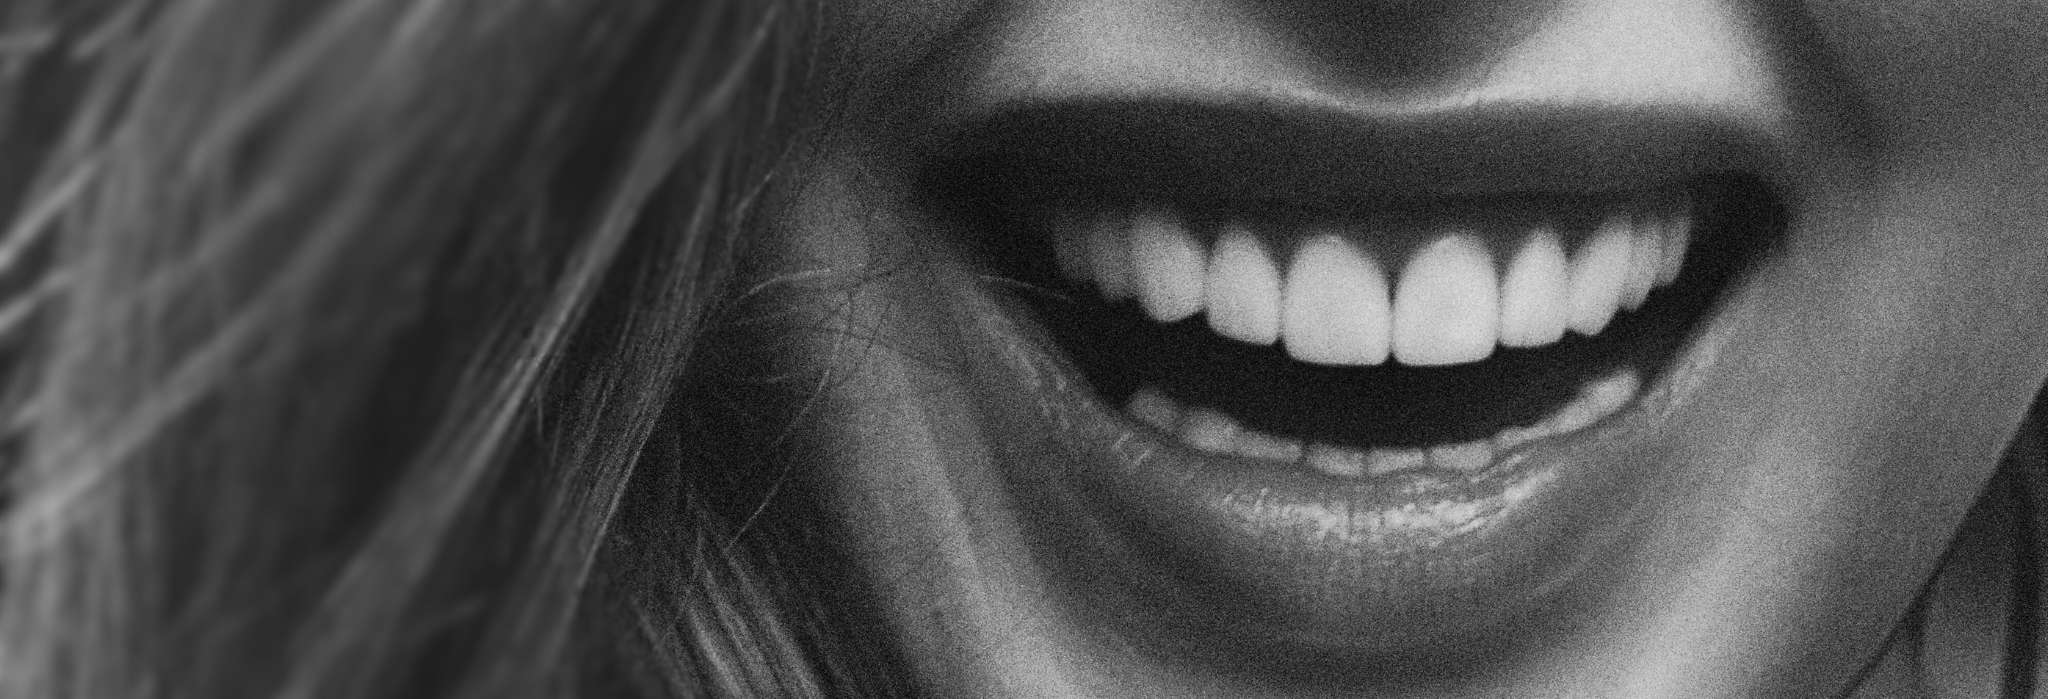 Close-up of a persons smile.